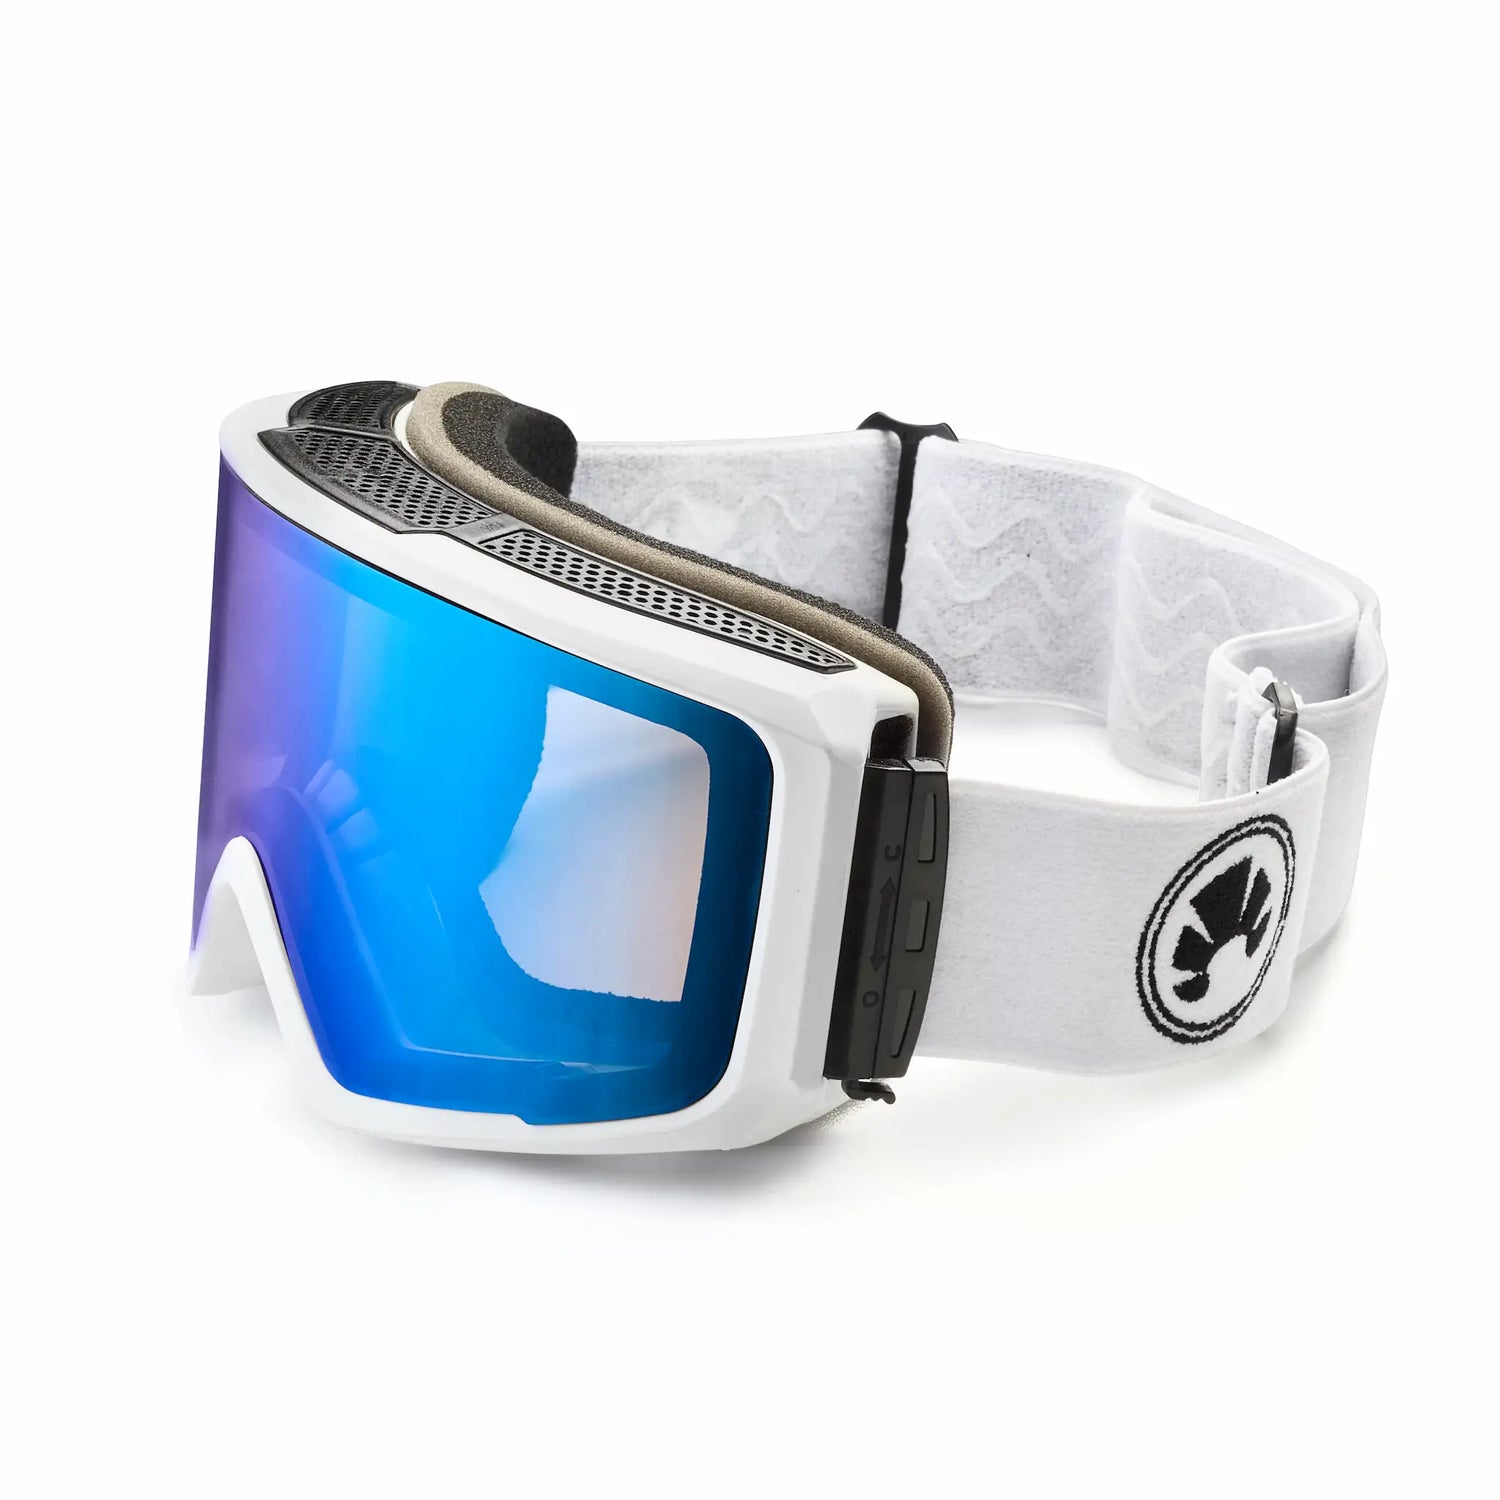 bakedsnow snowboard goggles with magnetic blue lens